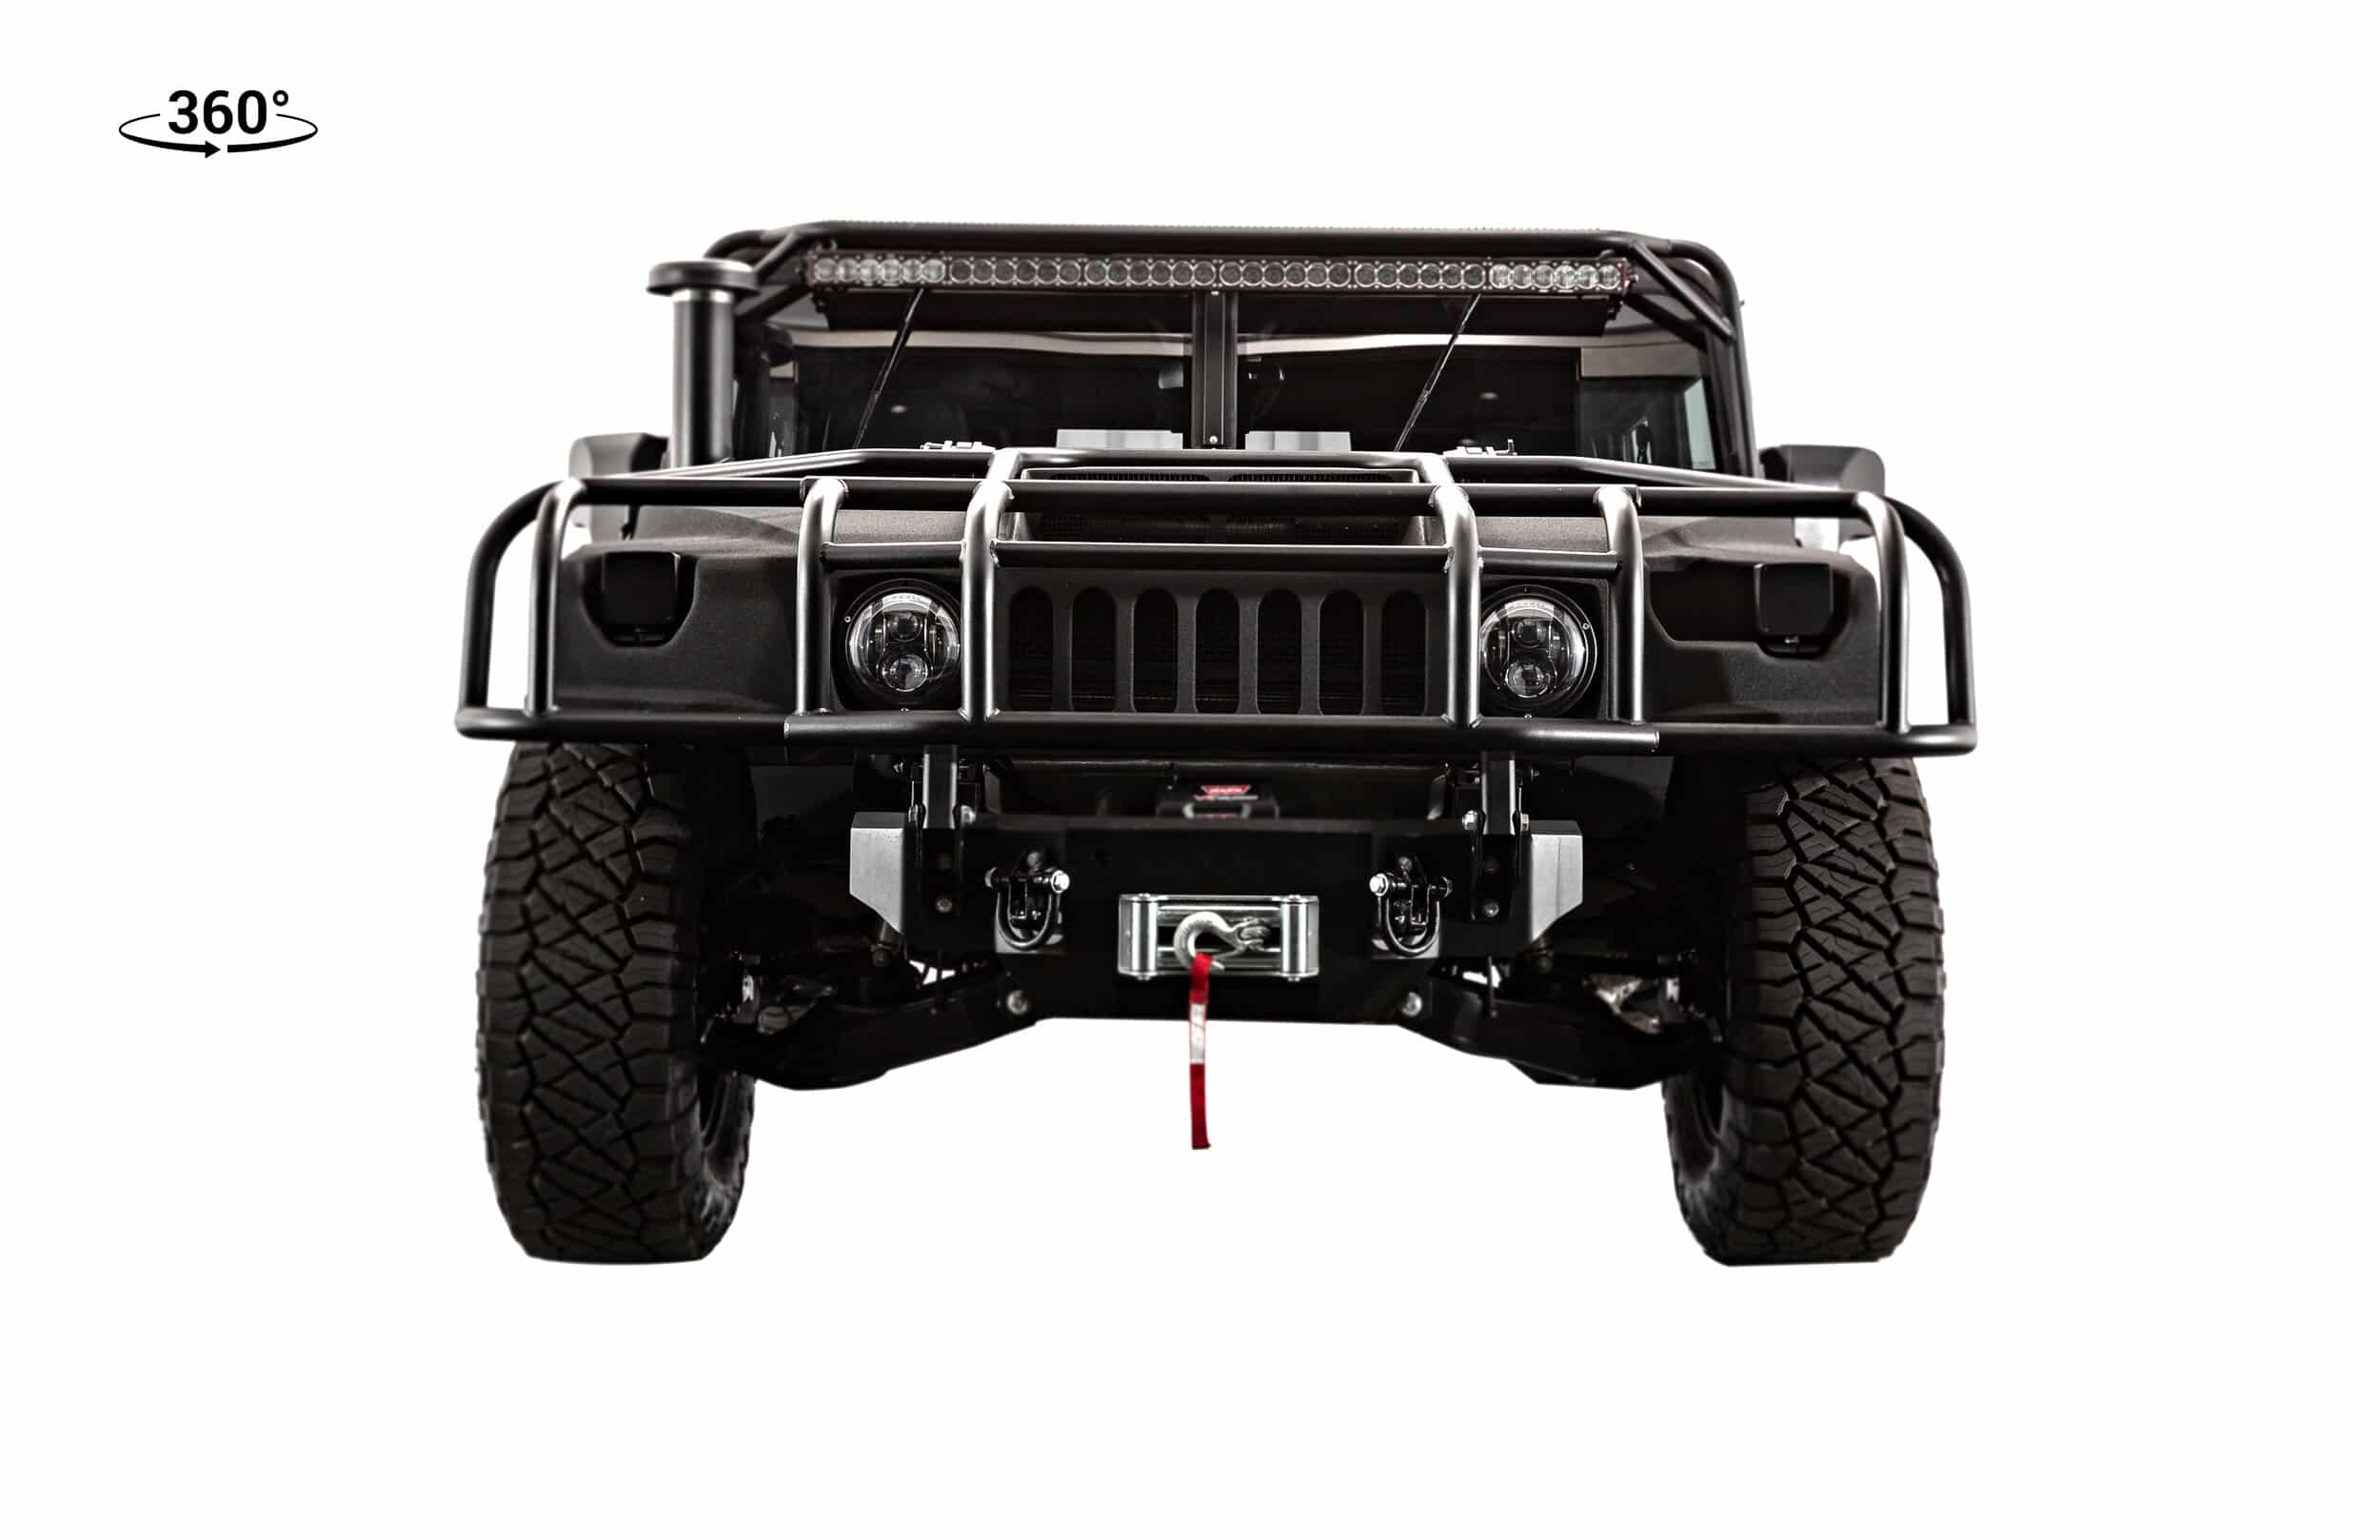 The Mil-Spec Hummer H1 Is Built For Off-Roading